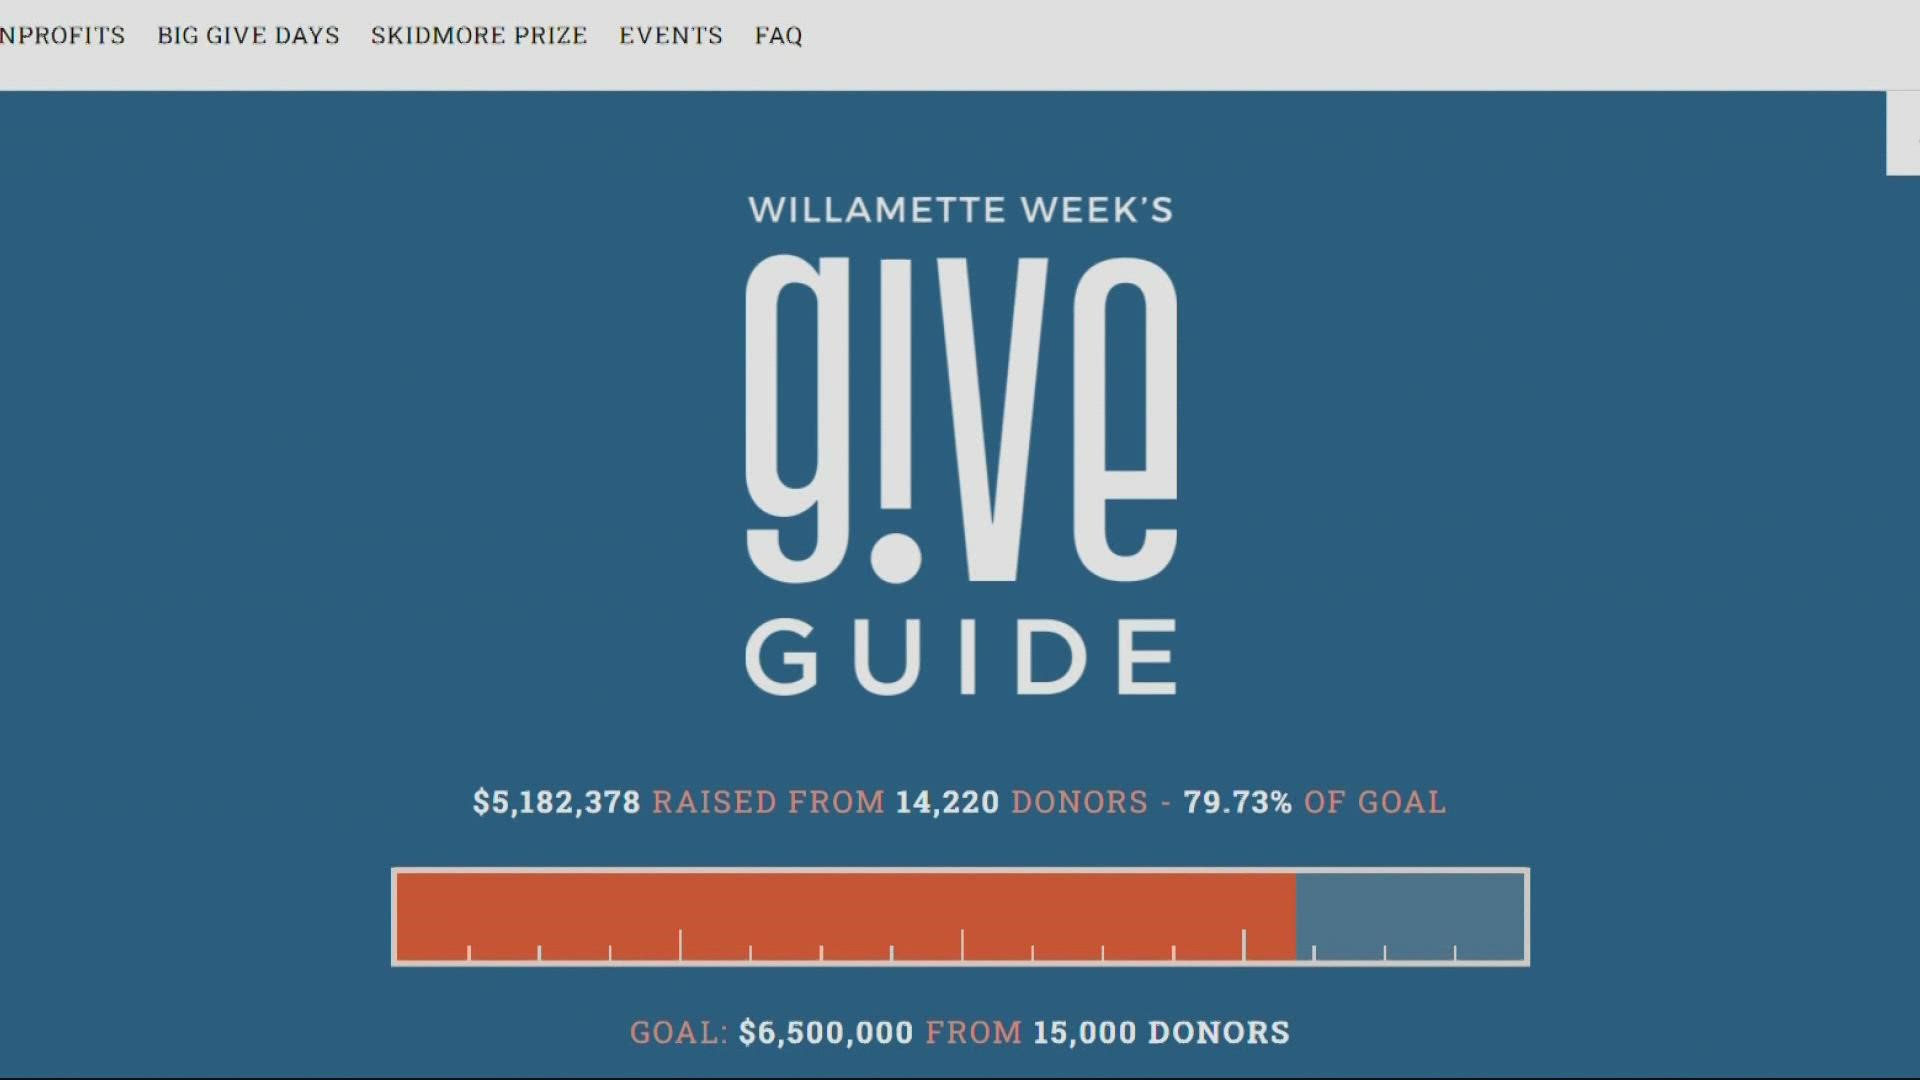 Willamette Week’s Give Guide has more than 200 local nonprofits worth your donations. They hope to raise an additional $1.5 million this year.